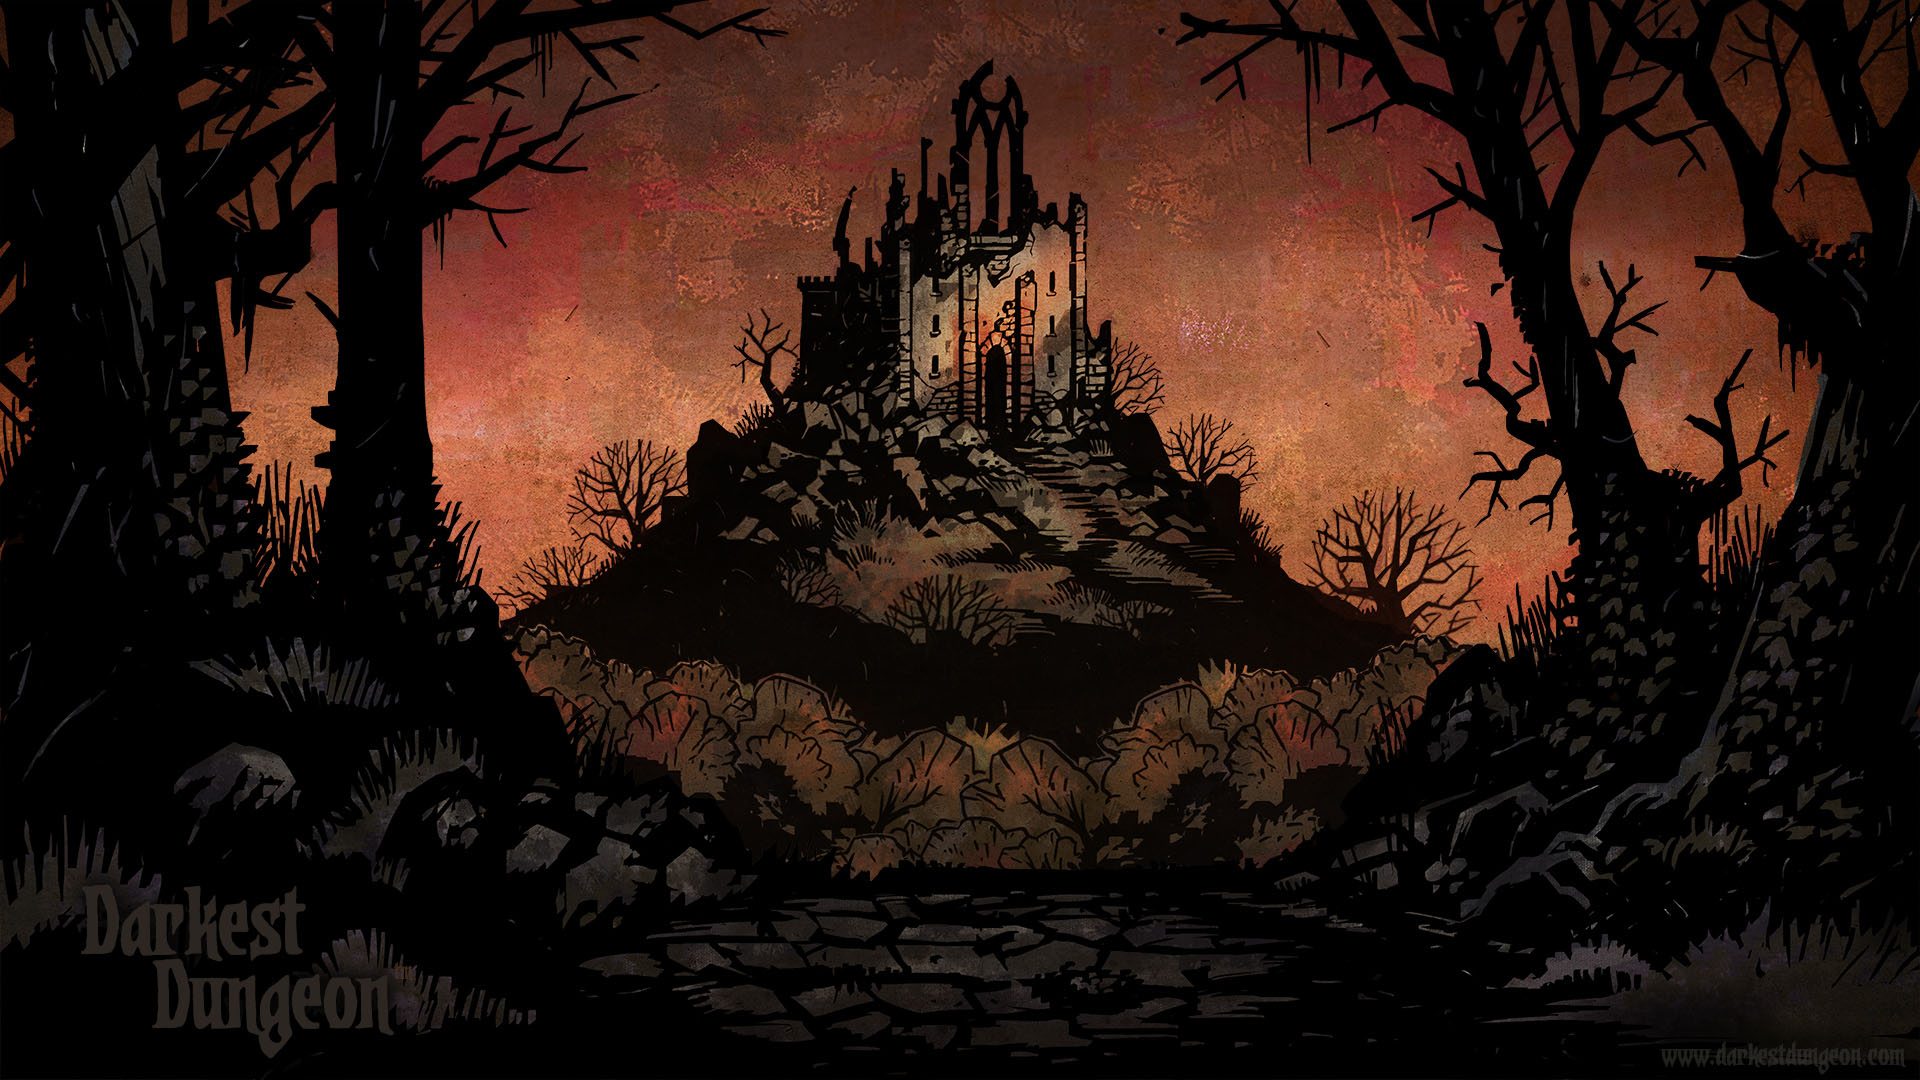 Darkest Dungeon Is A Roguelike Crawler Video Game Created By